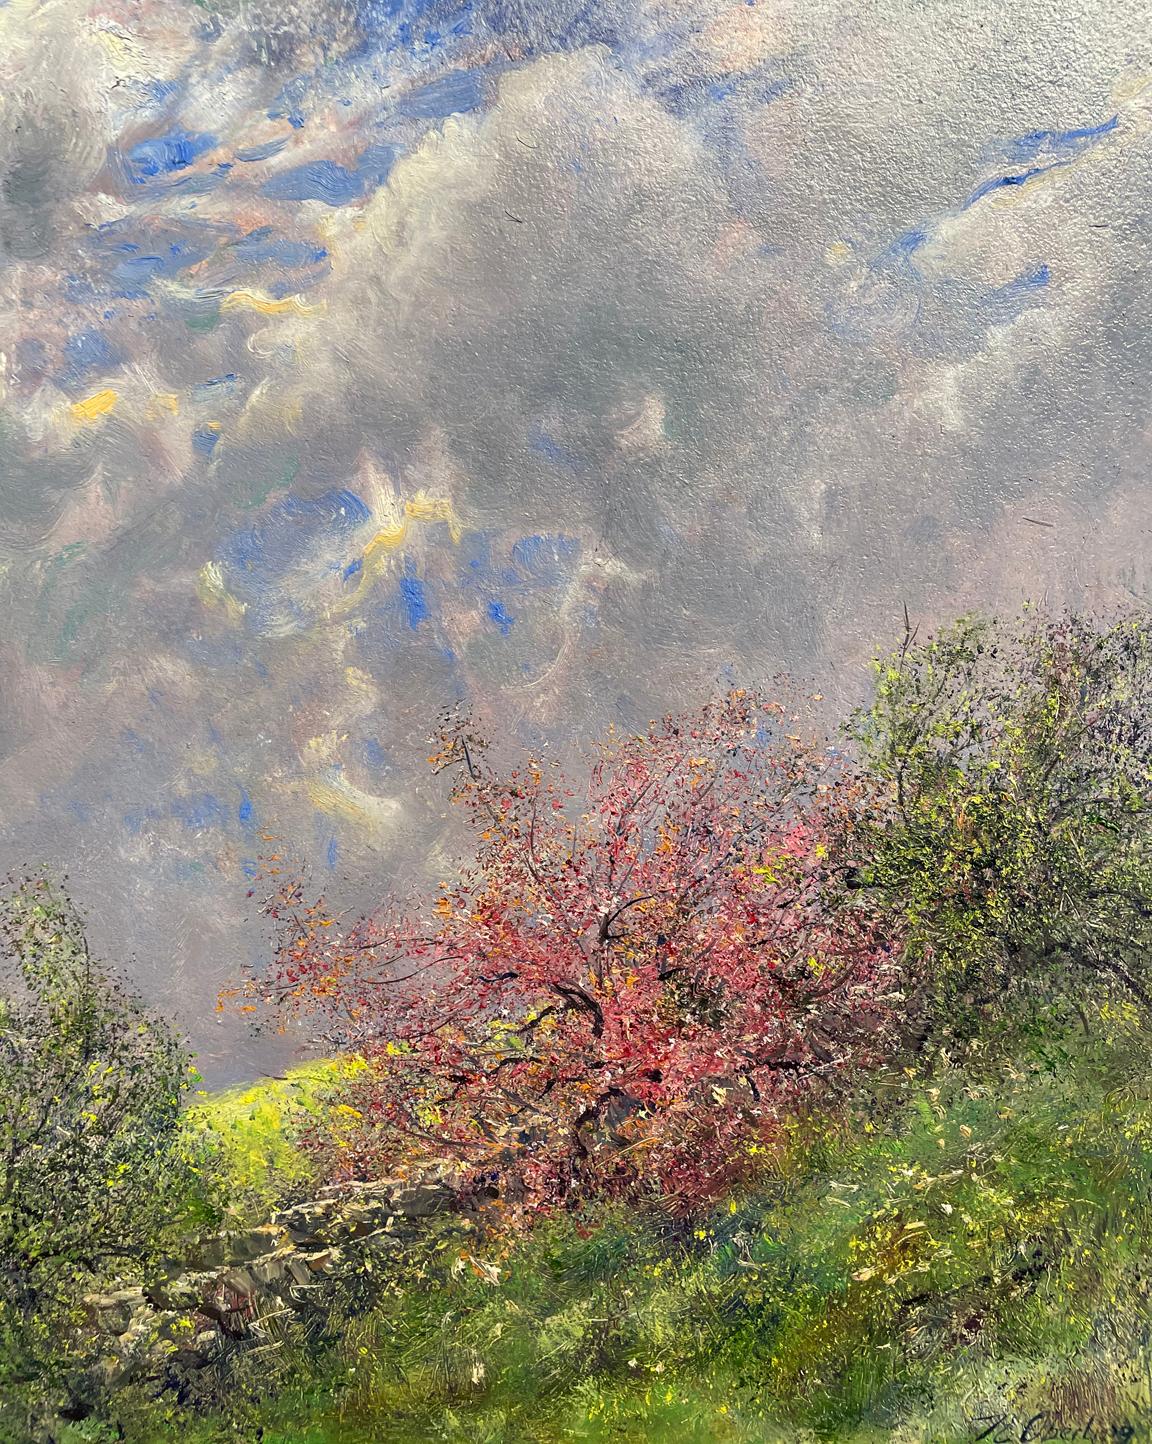 Montana Orchard in Storm - Painting by Nicholas Oberling